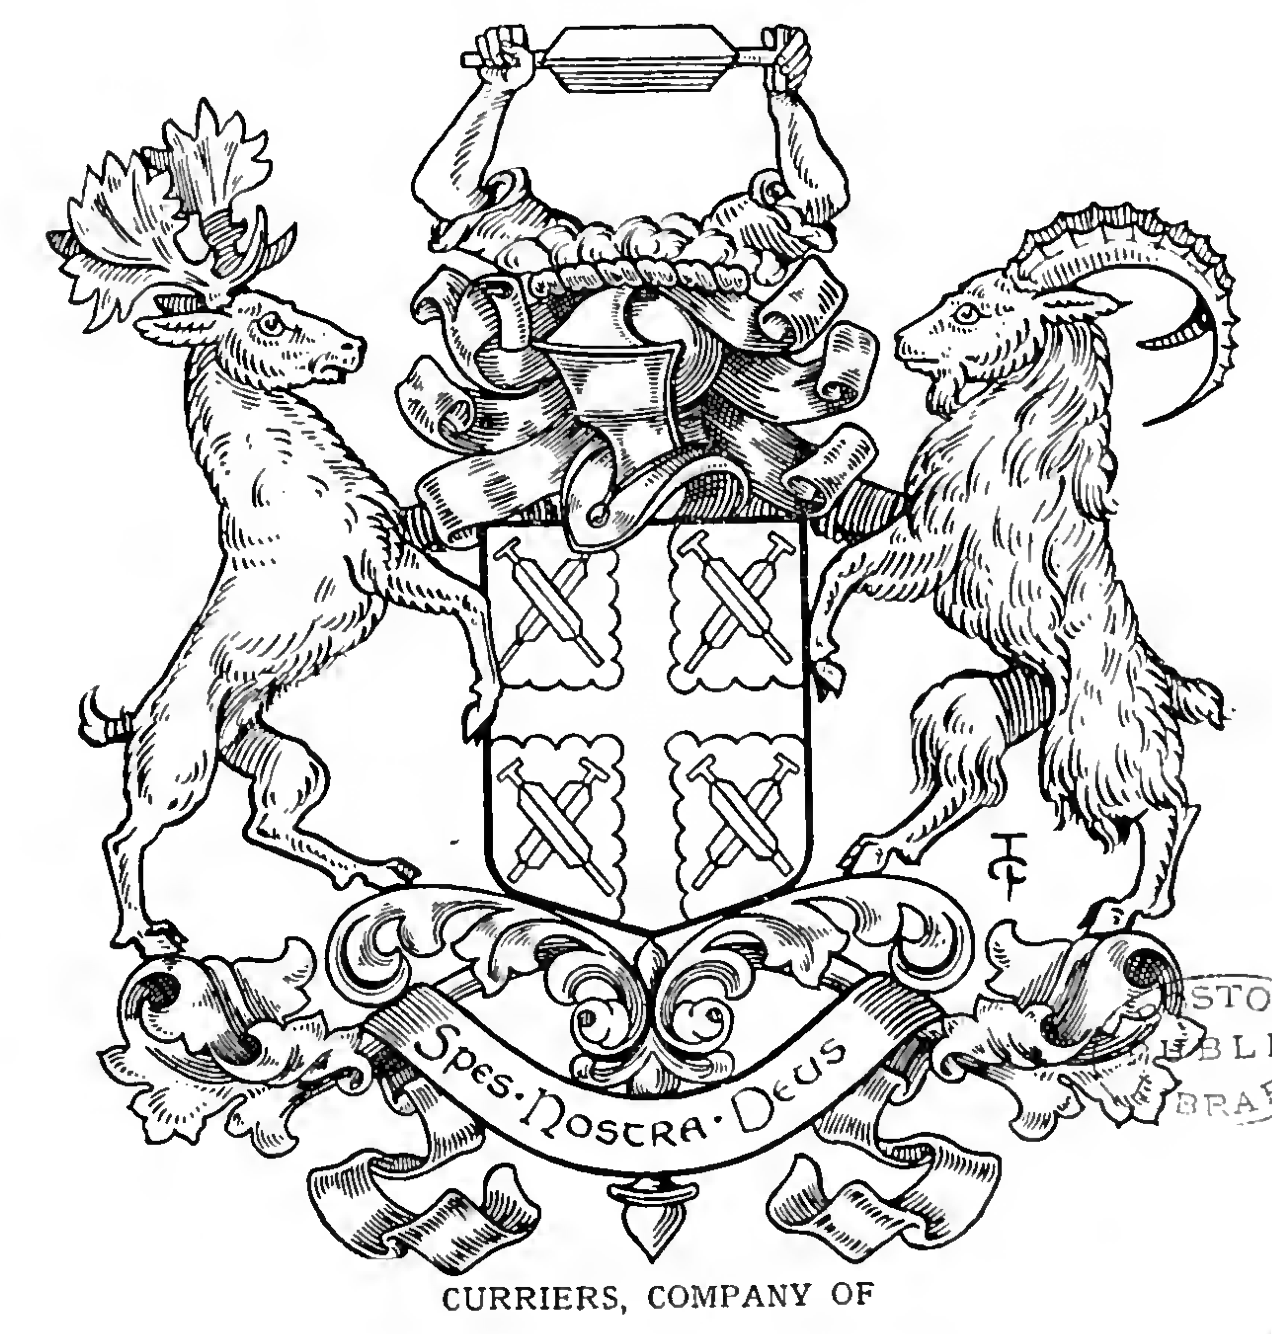 CURRIERS, The Worshipful Company of (London).